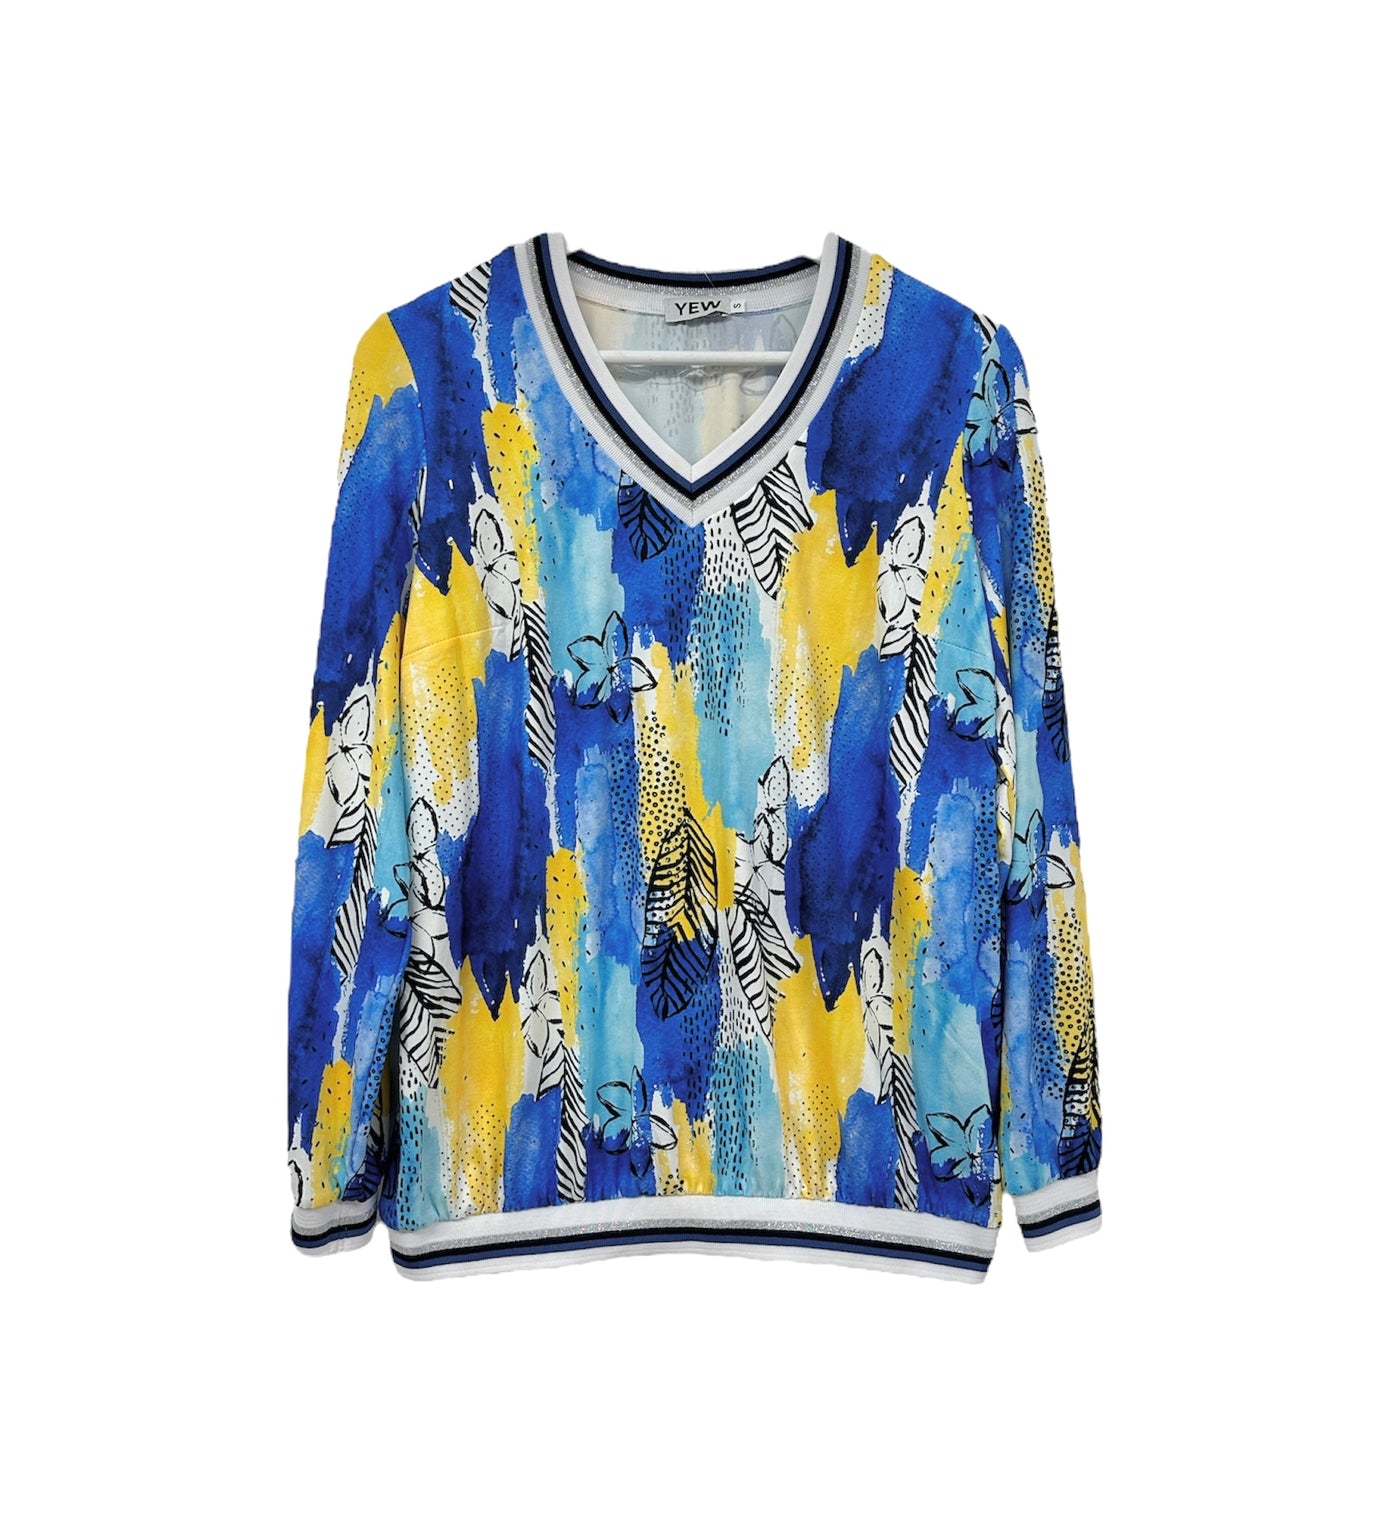 Blue/Yellow/White Top With Floral Design With Stripe Design